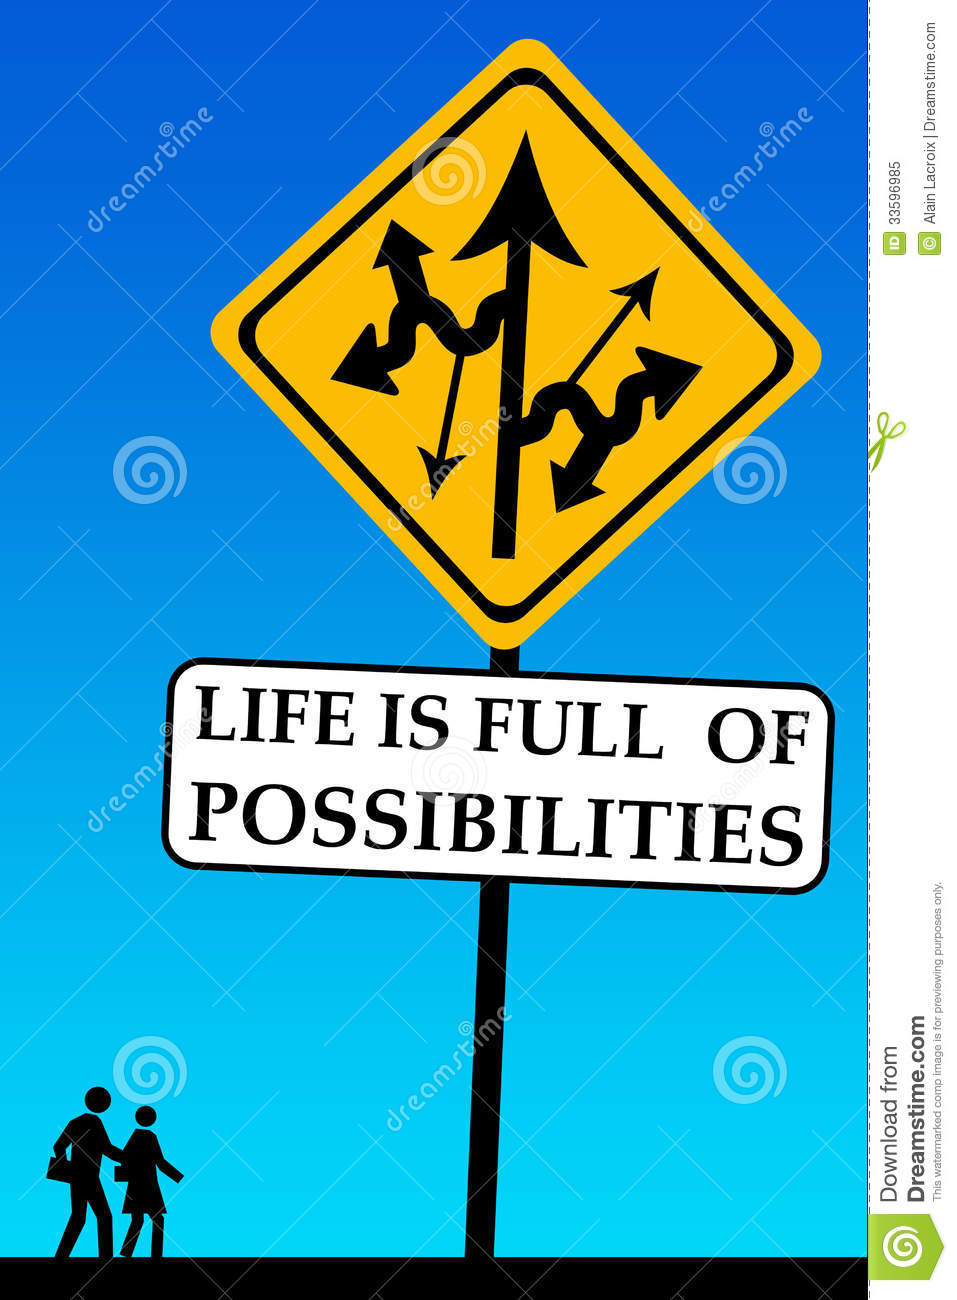 Possibilities Royalty Free Stock Photo   Image  33596985